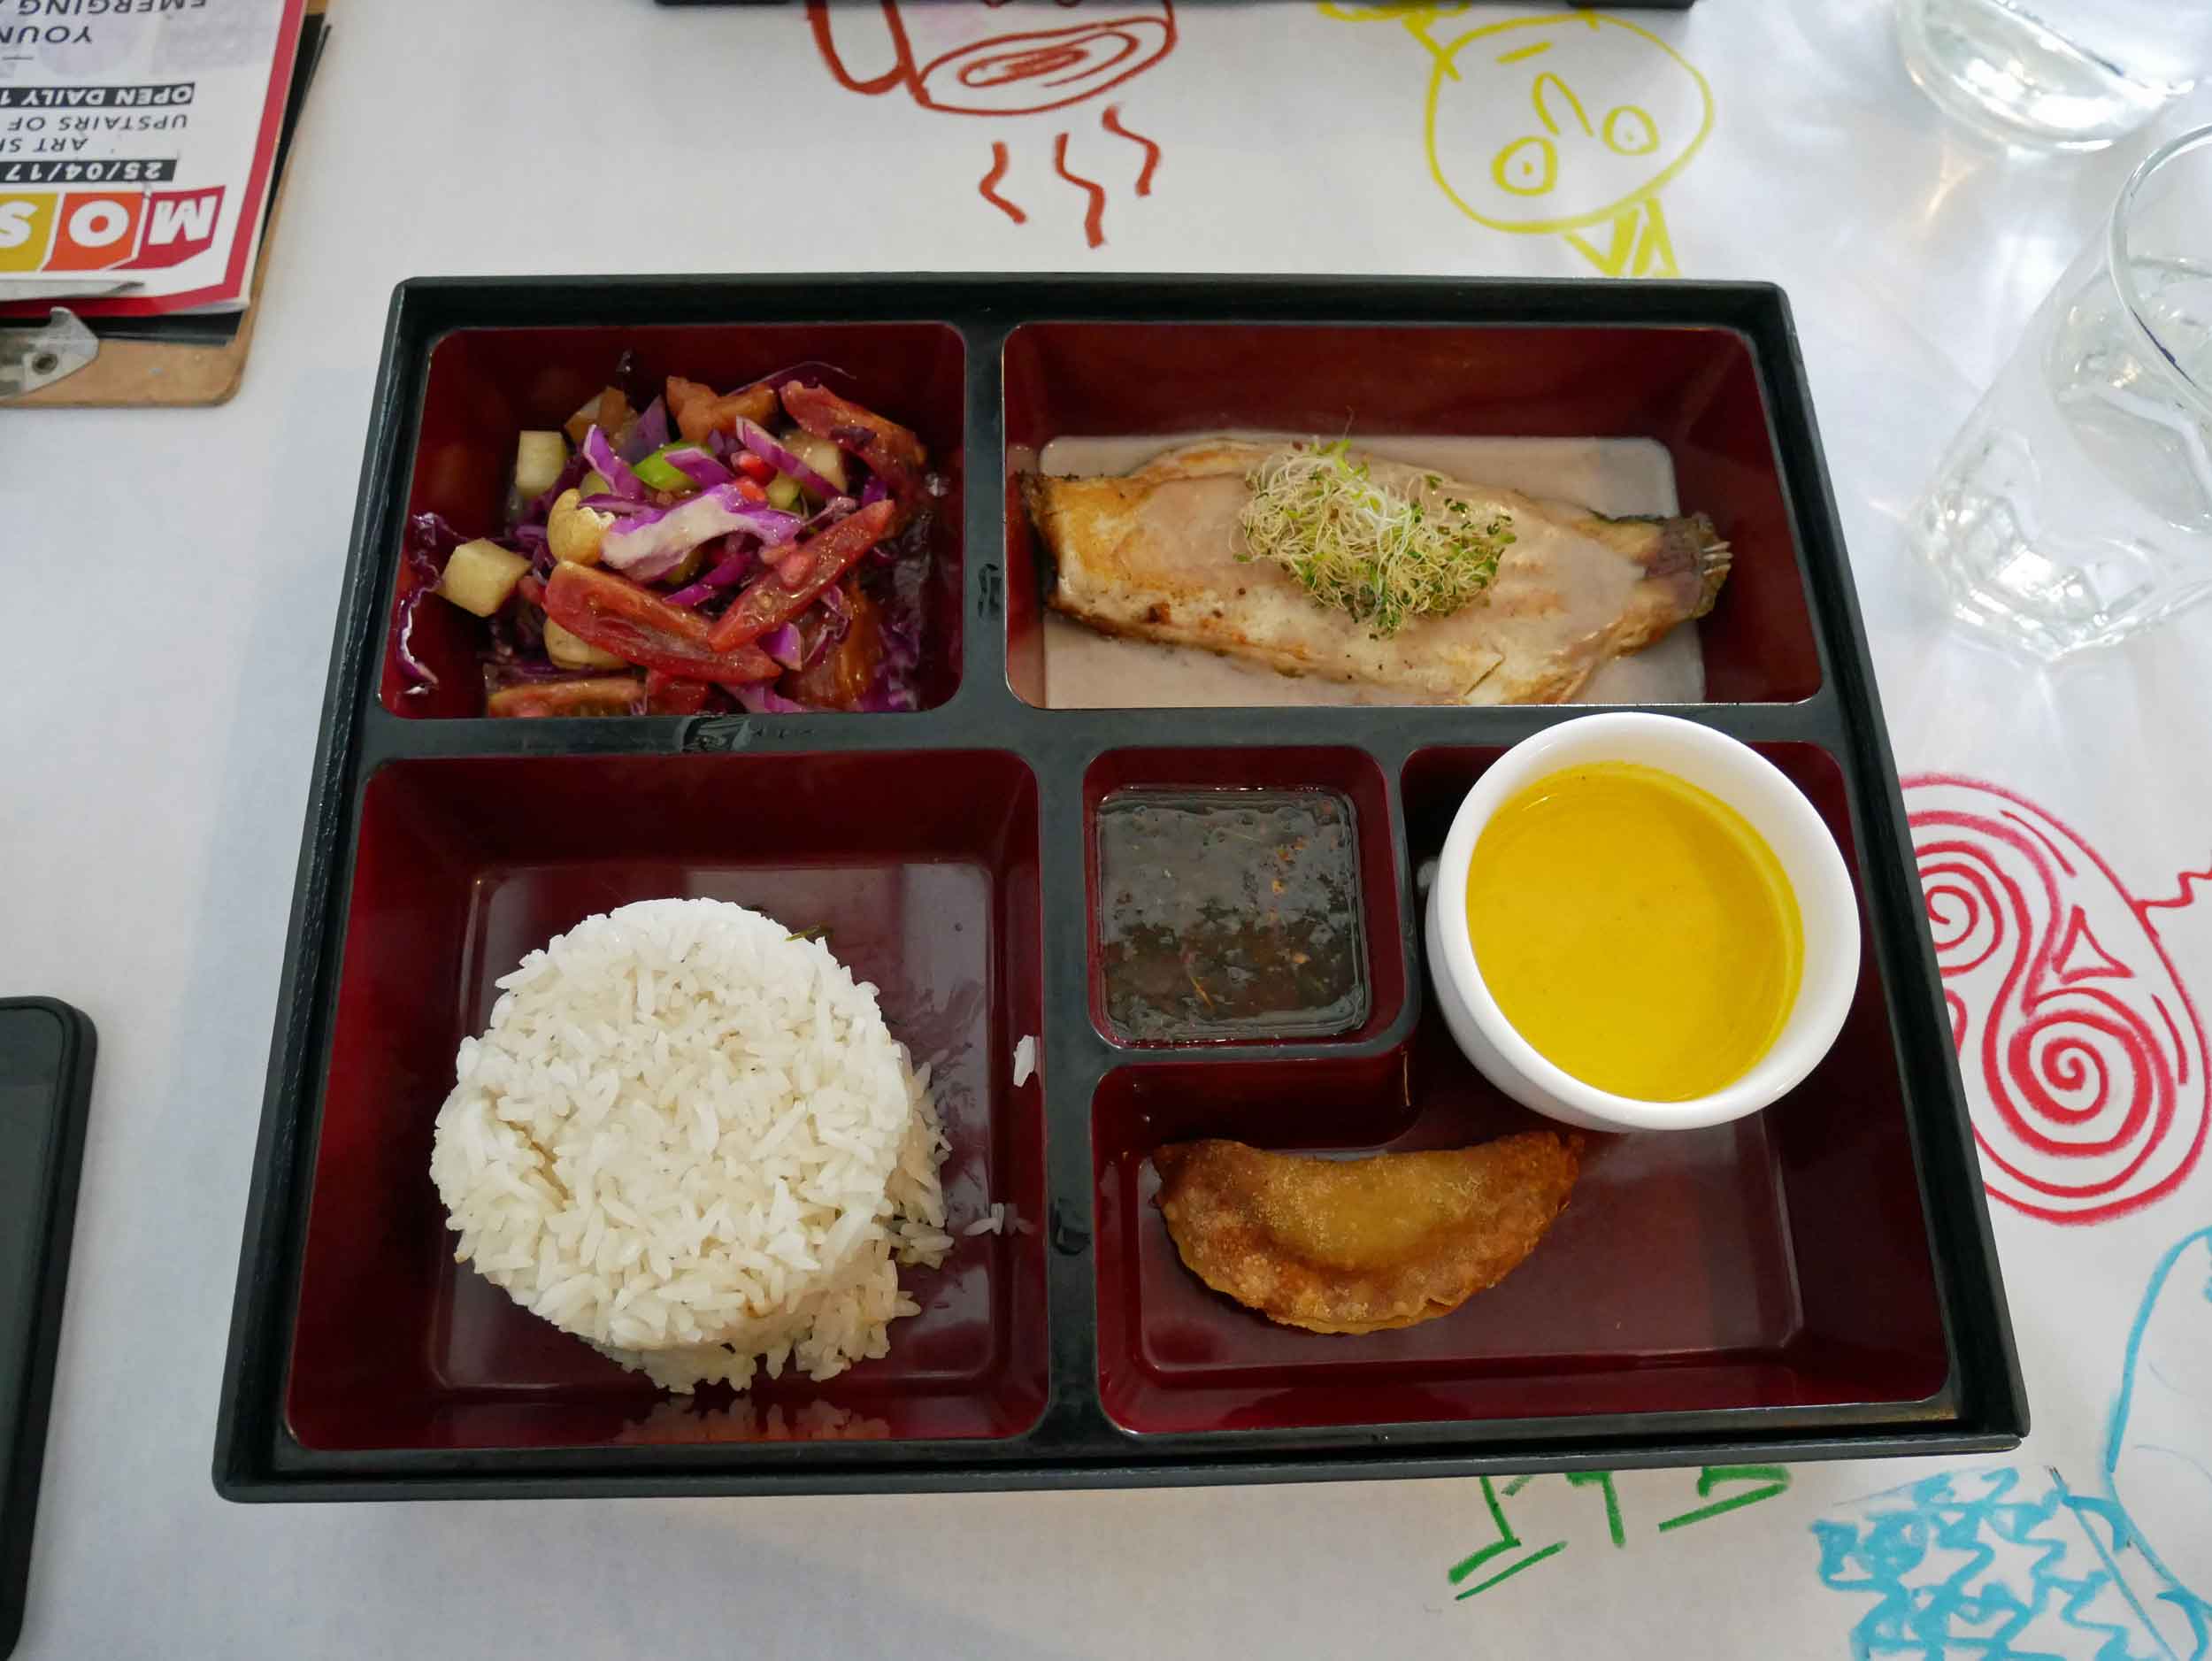  At China House, we enjoyed a bento box lunch that included carrot soup, grilled fish, rosemary rice, vegetable salad.&nbsp; 